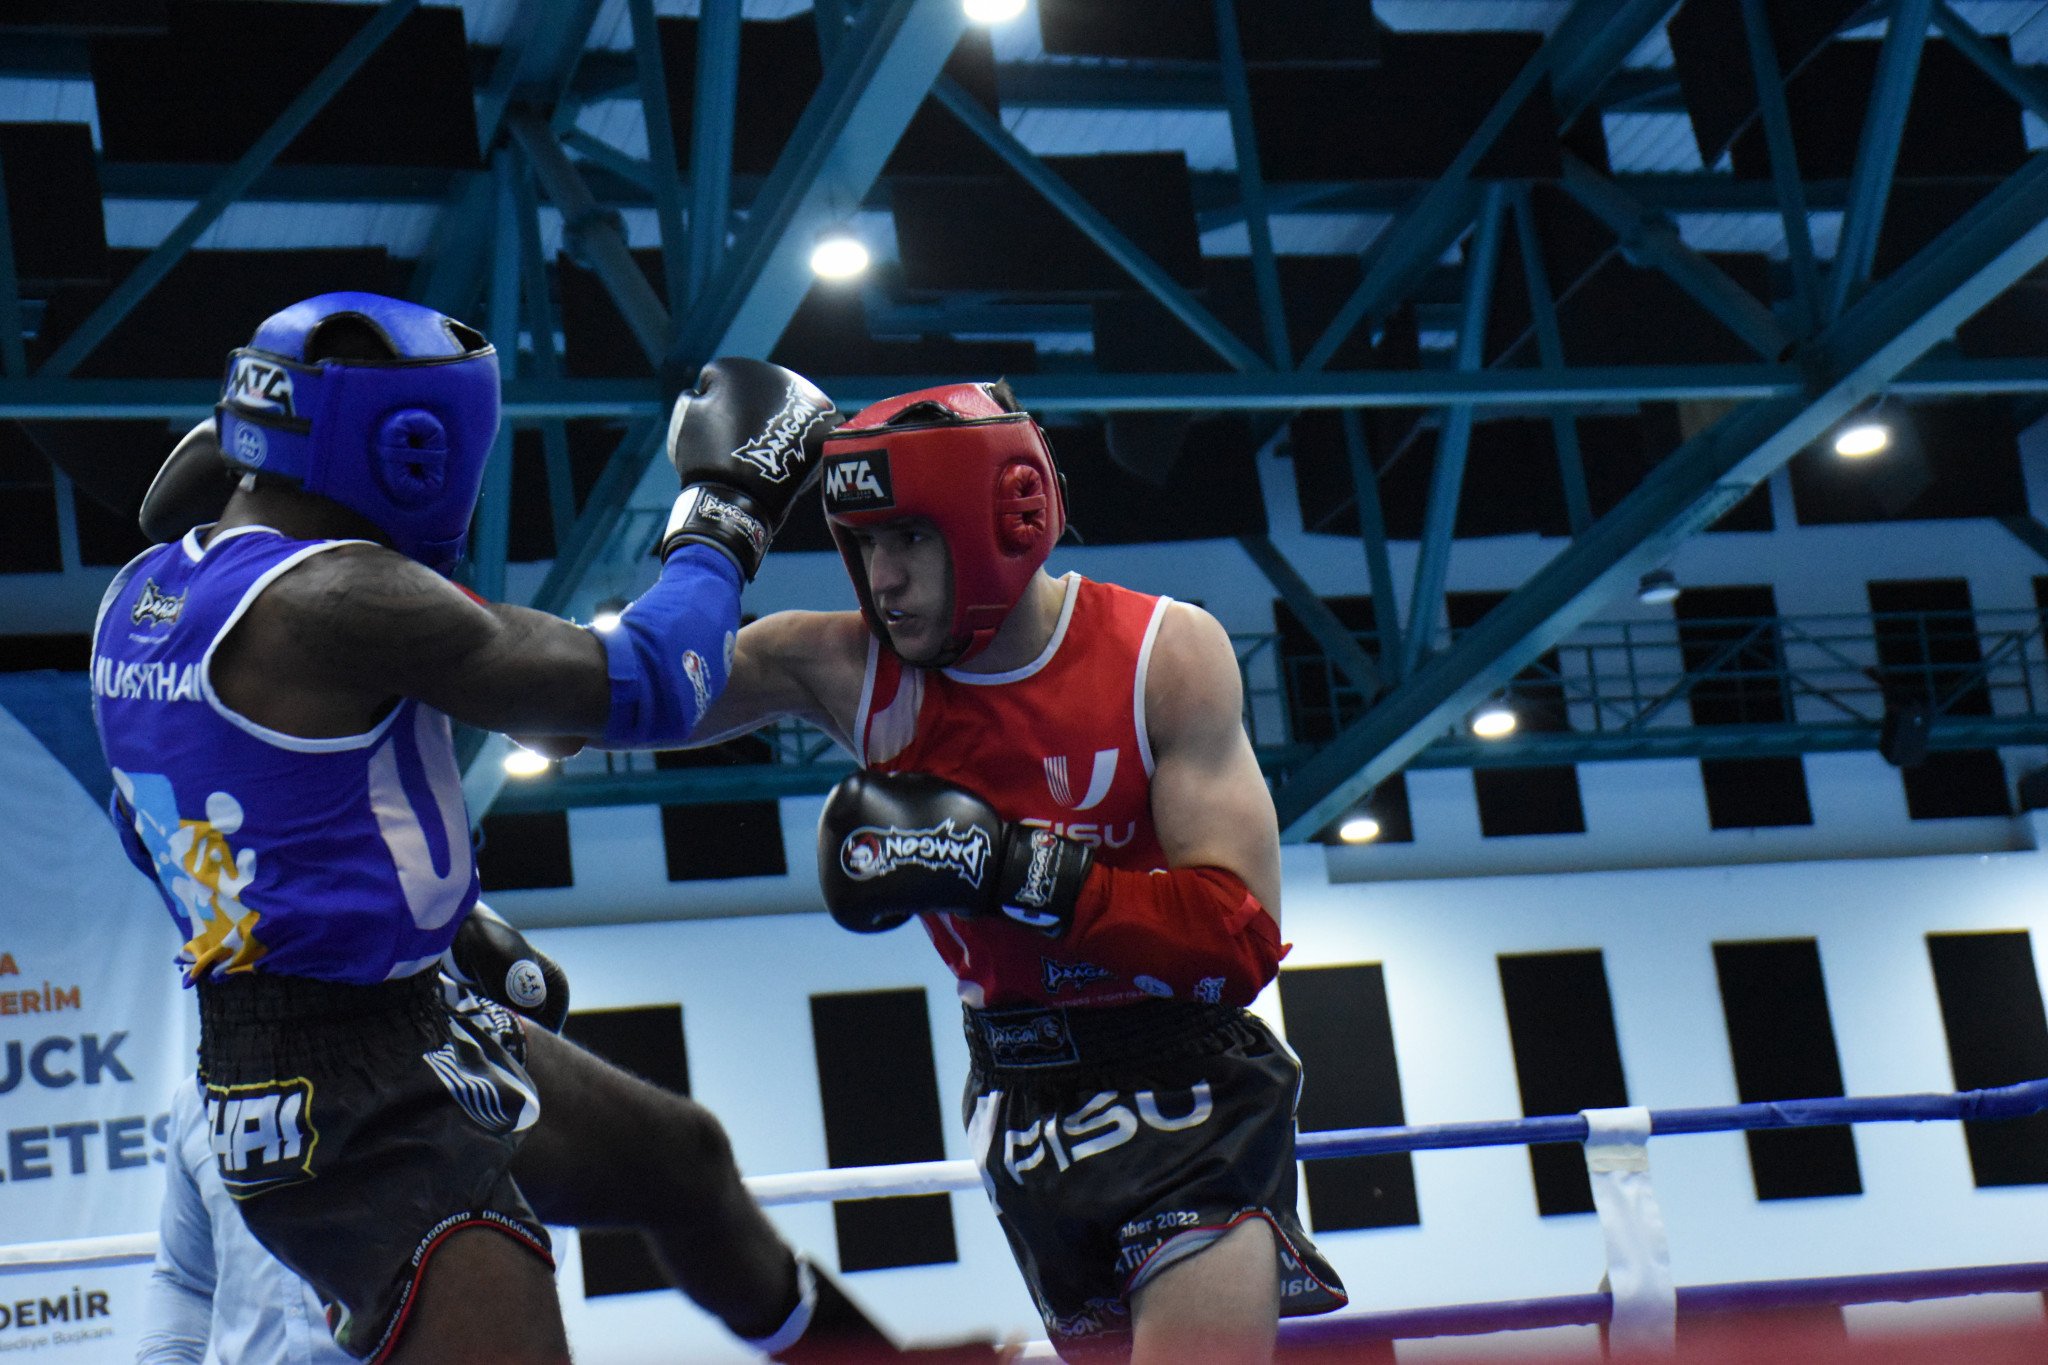 Muaythai fighters booked their spots in the finals of their respective categories ©FISU